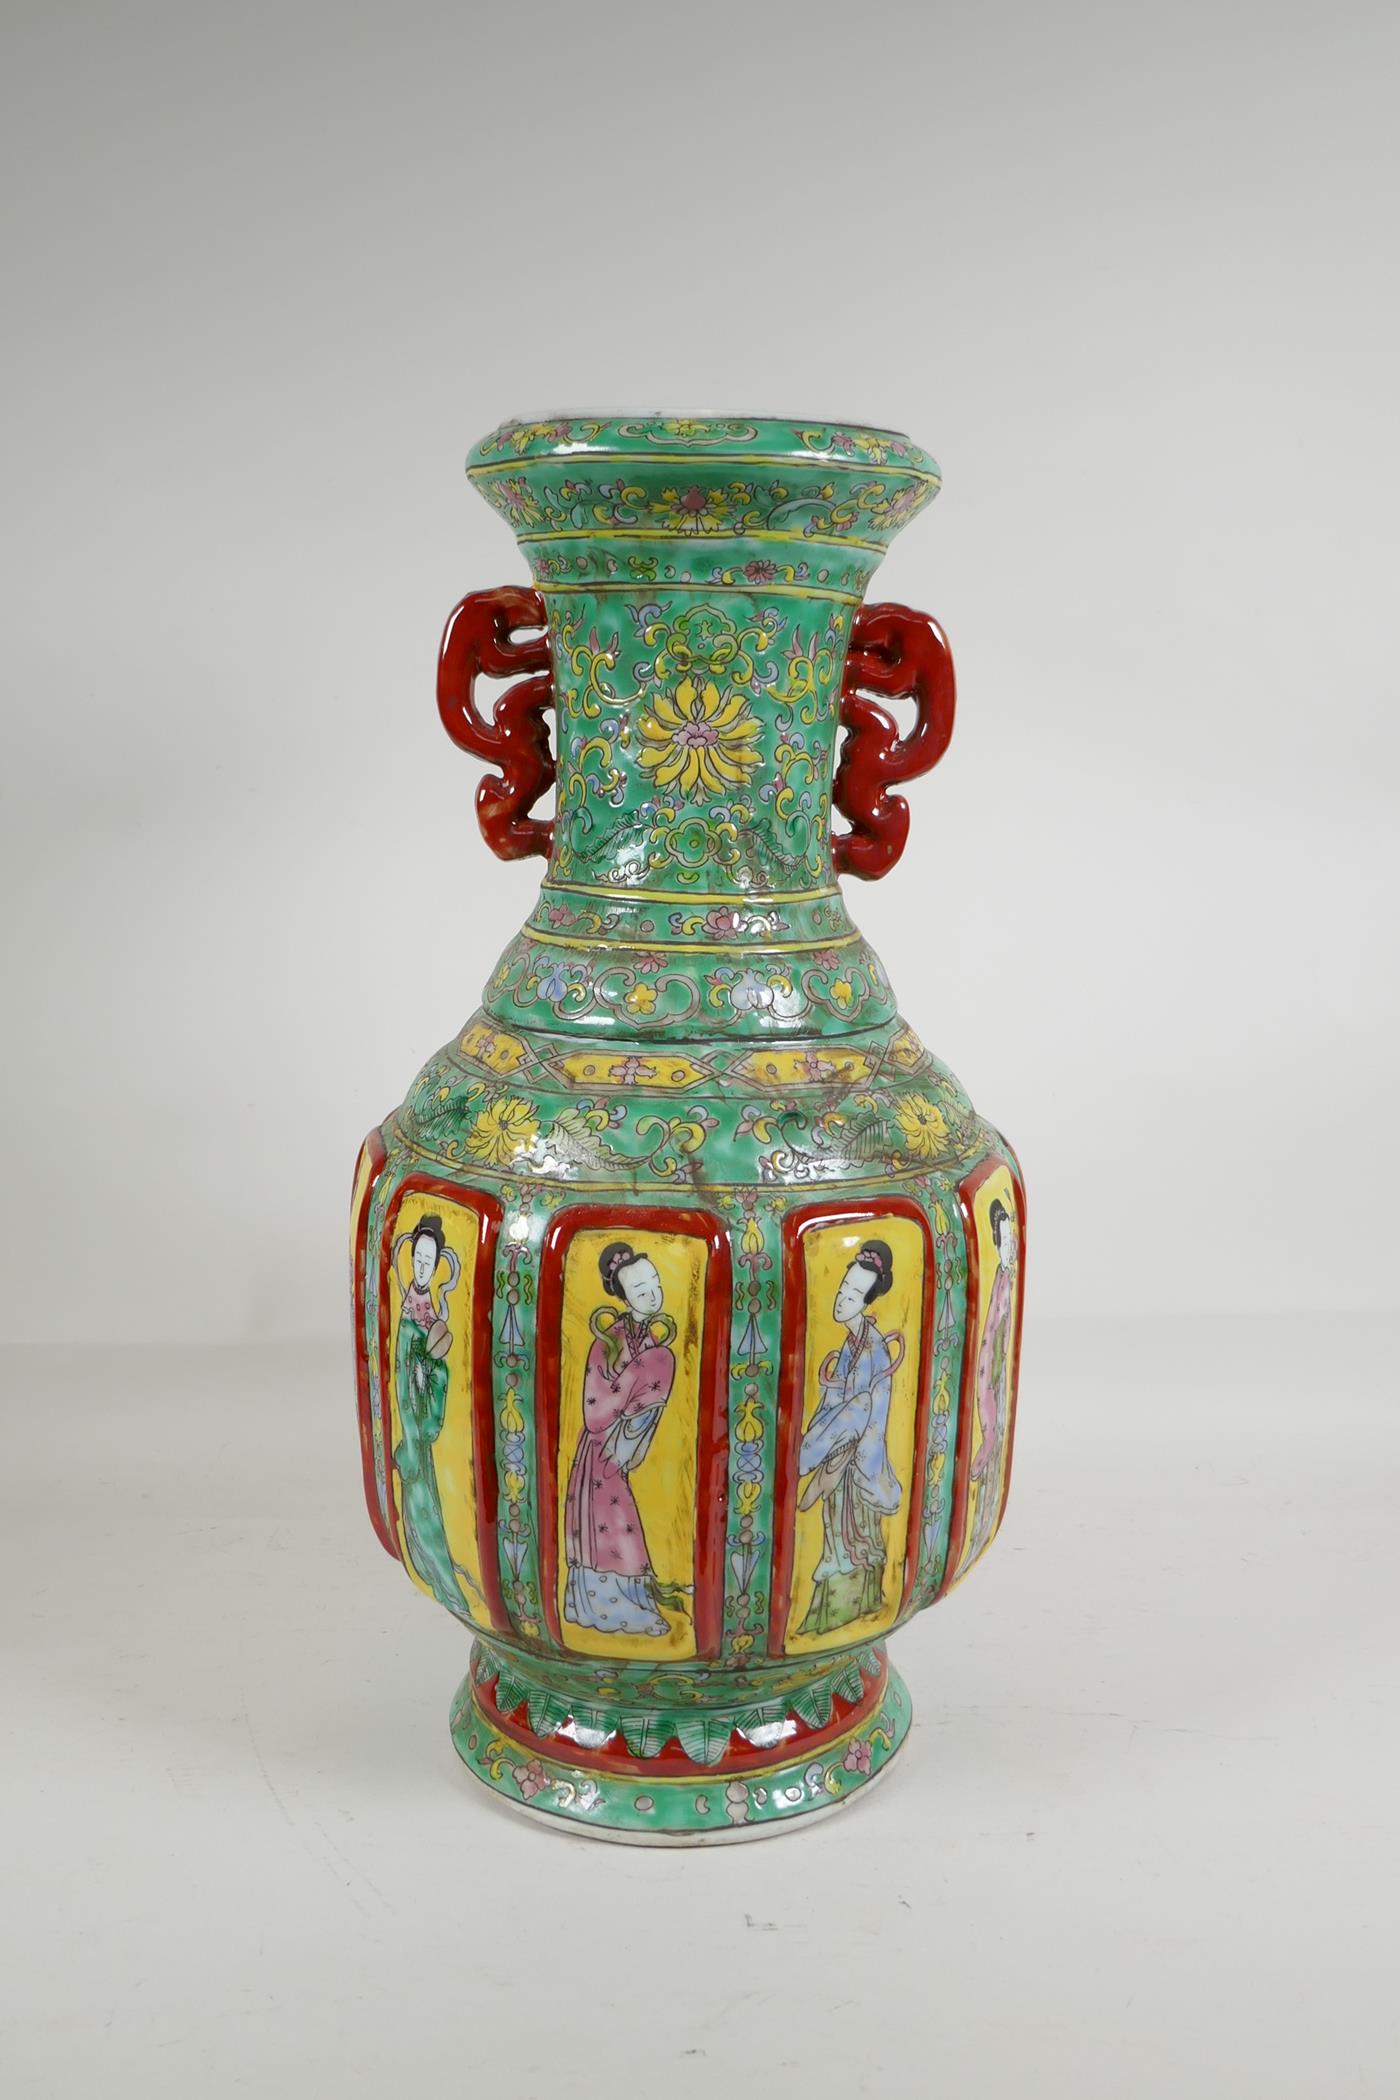 A Chinese polychrome porcelain two handled vase with raised decorative enamelled panels, depicting